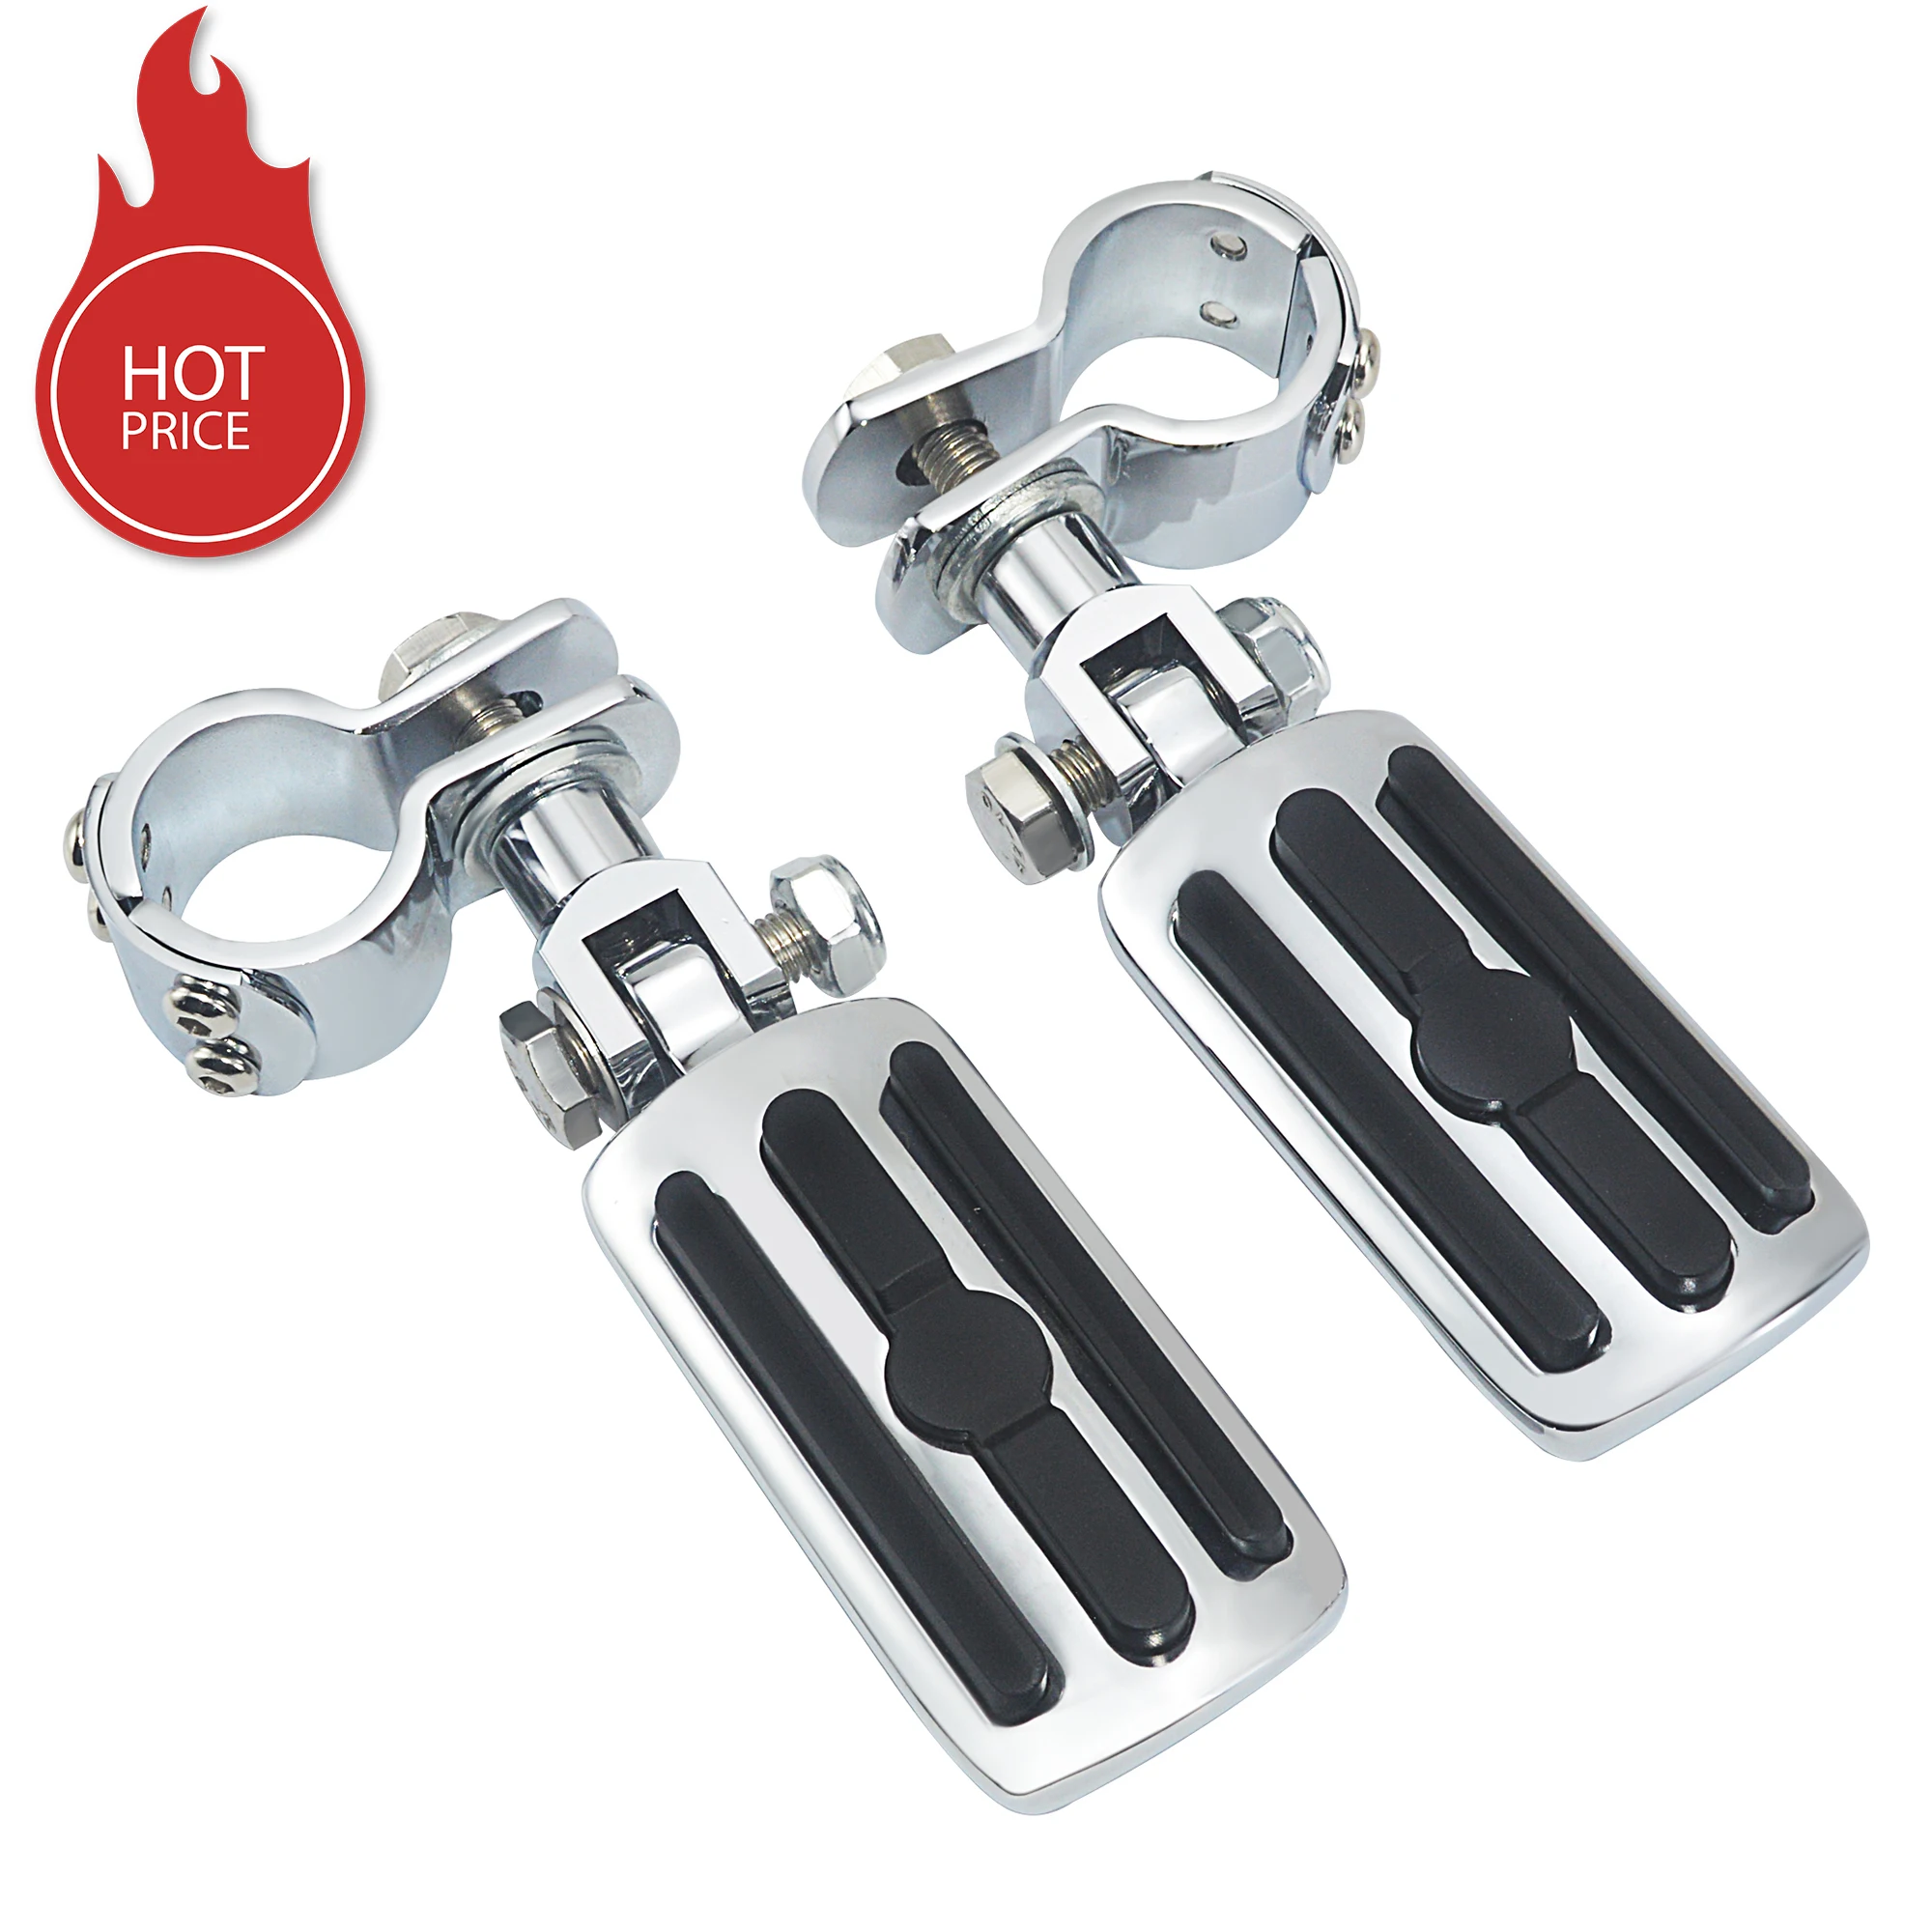 Chrome Motorcycle Highway Clamp Foot Pegs Footrest Pedal Footpegs Mount For - $38.40+